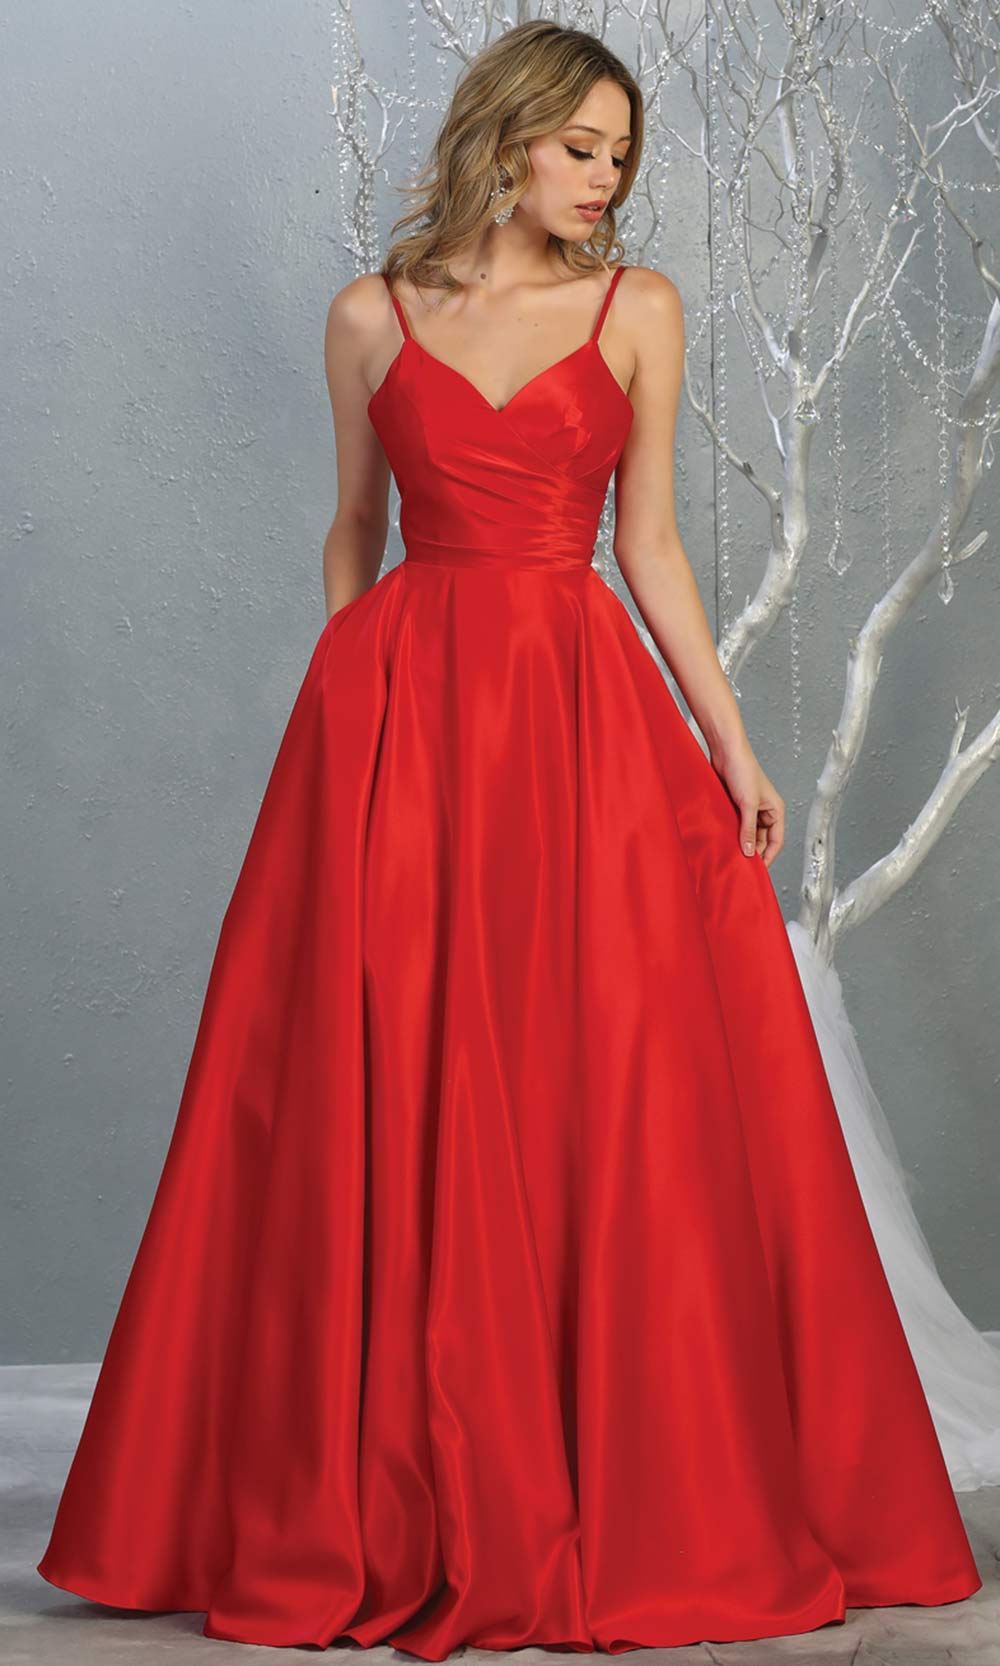 Mayqueen MQ 1678 Long simple v neck red satin semi ballgown with pockets. This red flowy gown from mayqueen is perfect for prom, black tie event, engagement dress, formal party dress, plus size wedding guest dresses, indowestern party dress